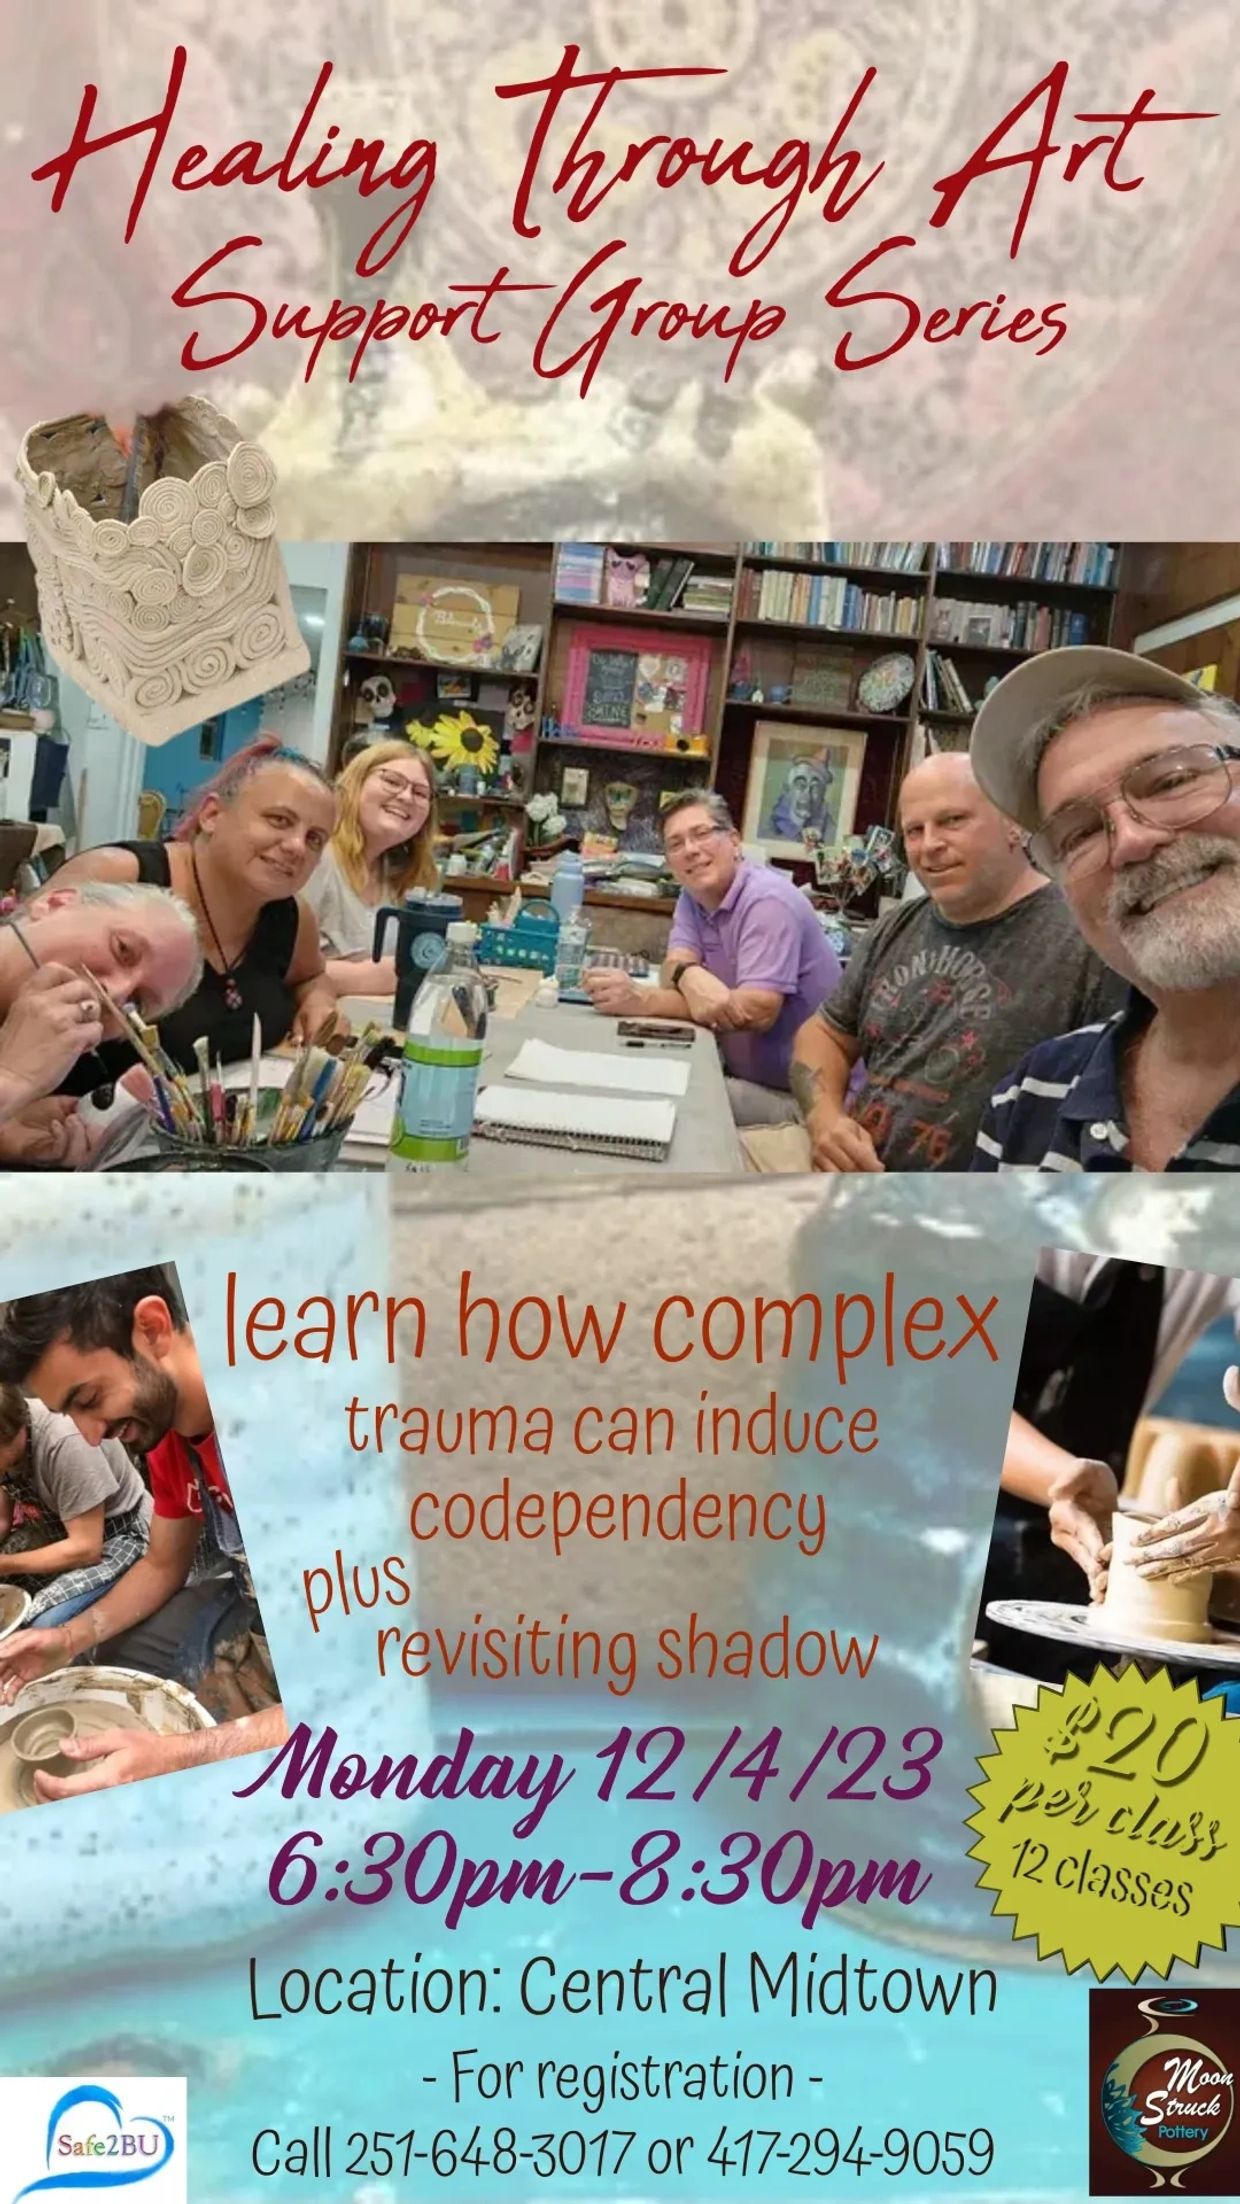 You've been asking when the next Healing Through Art Support Group Series is starting. Here it is!